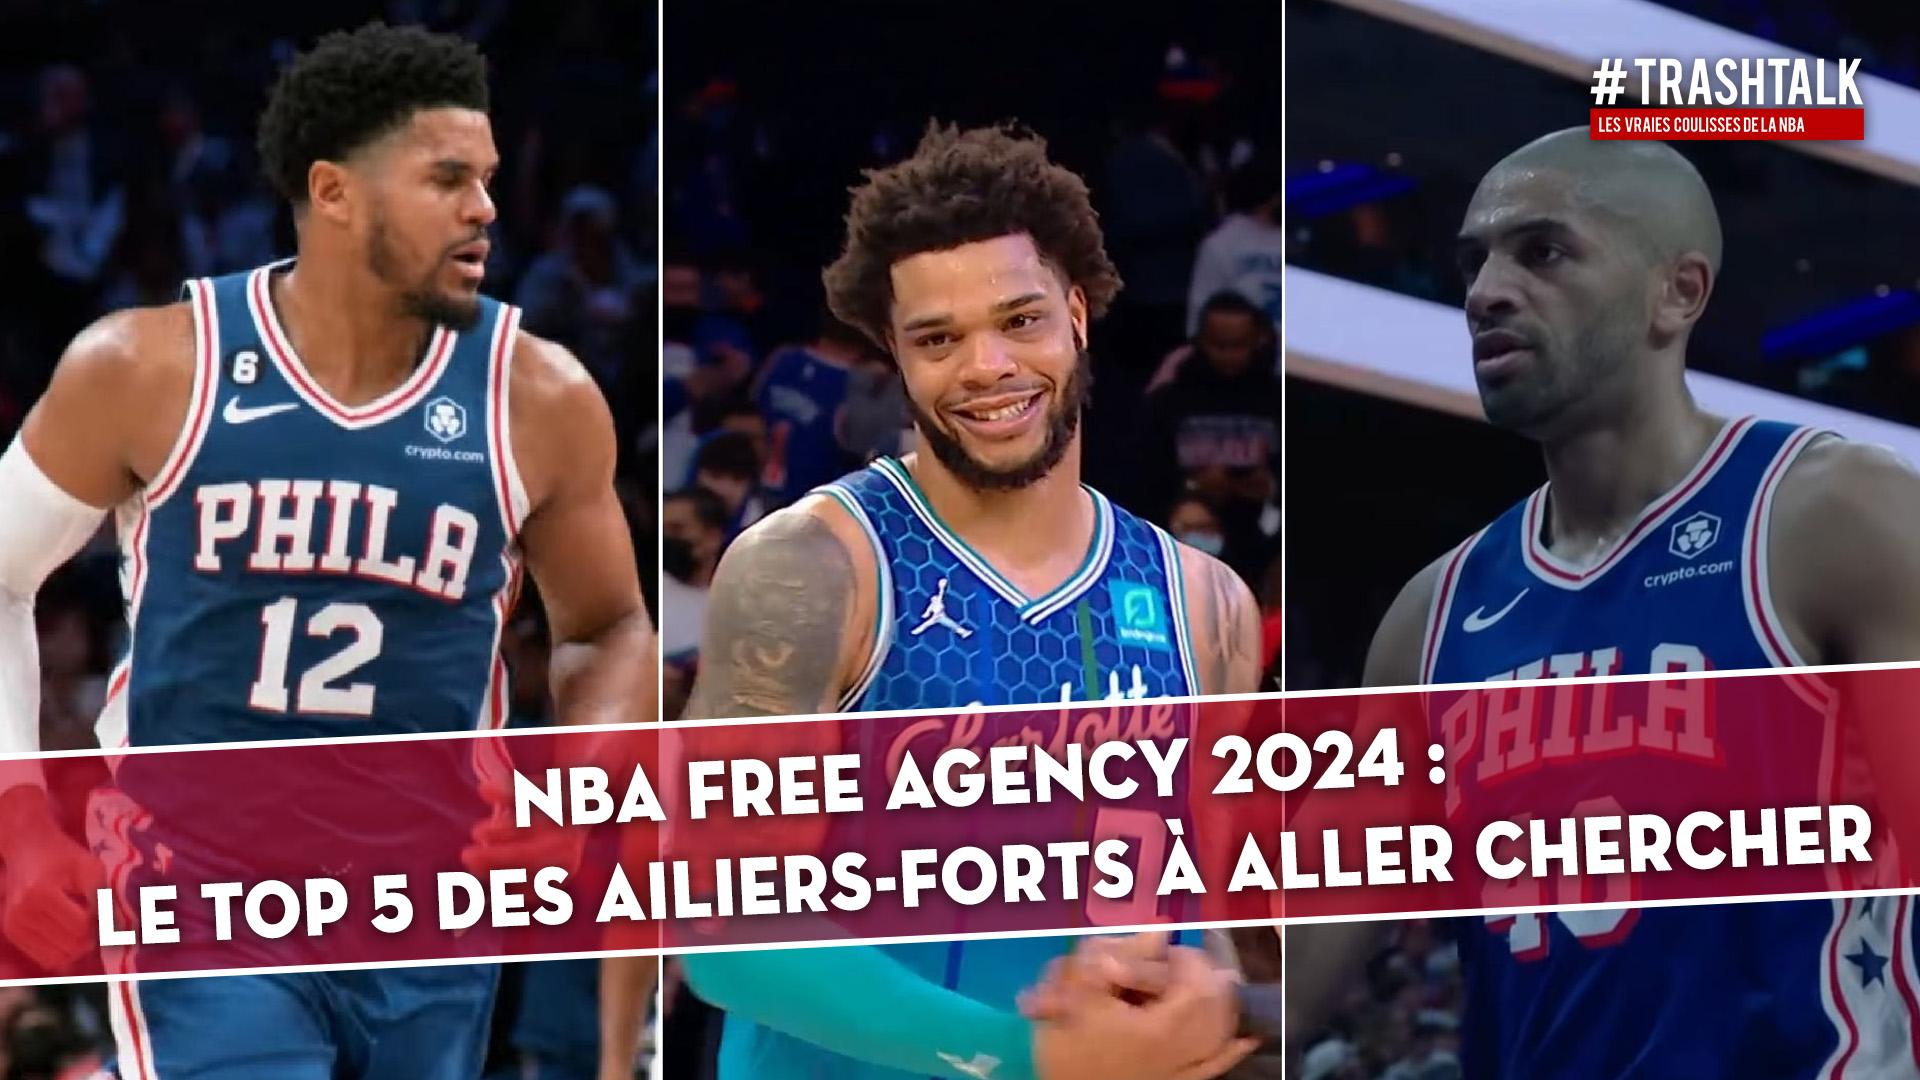 NBA Free Agency 2024 Top 5 Ailiers forts disponibles 24 juin 2024